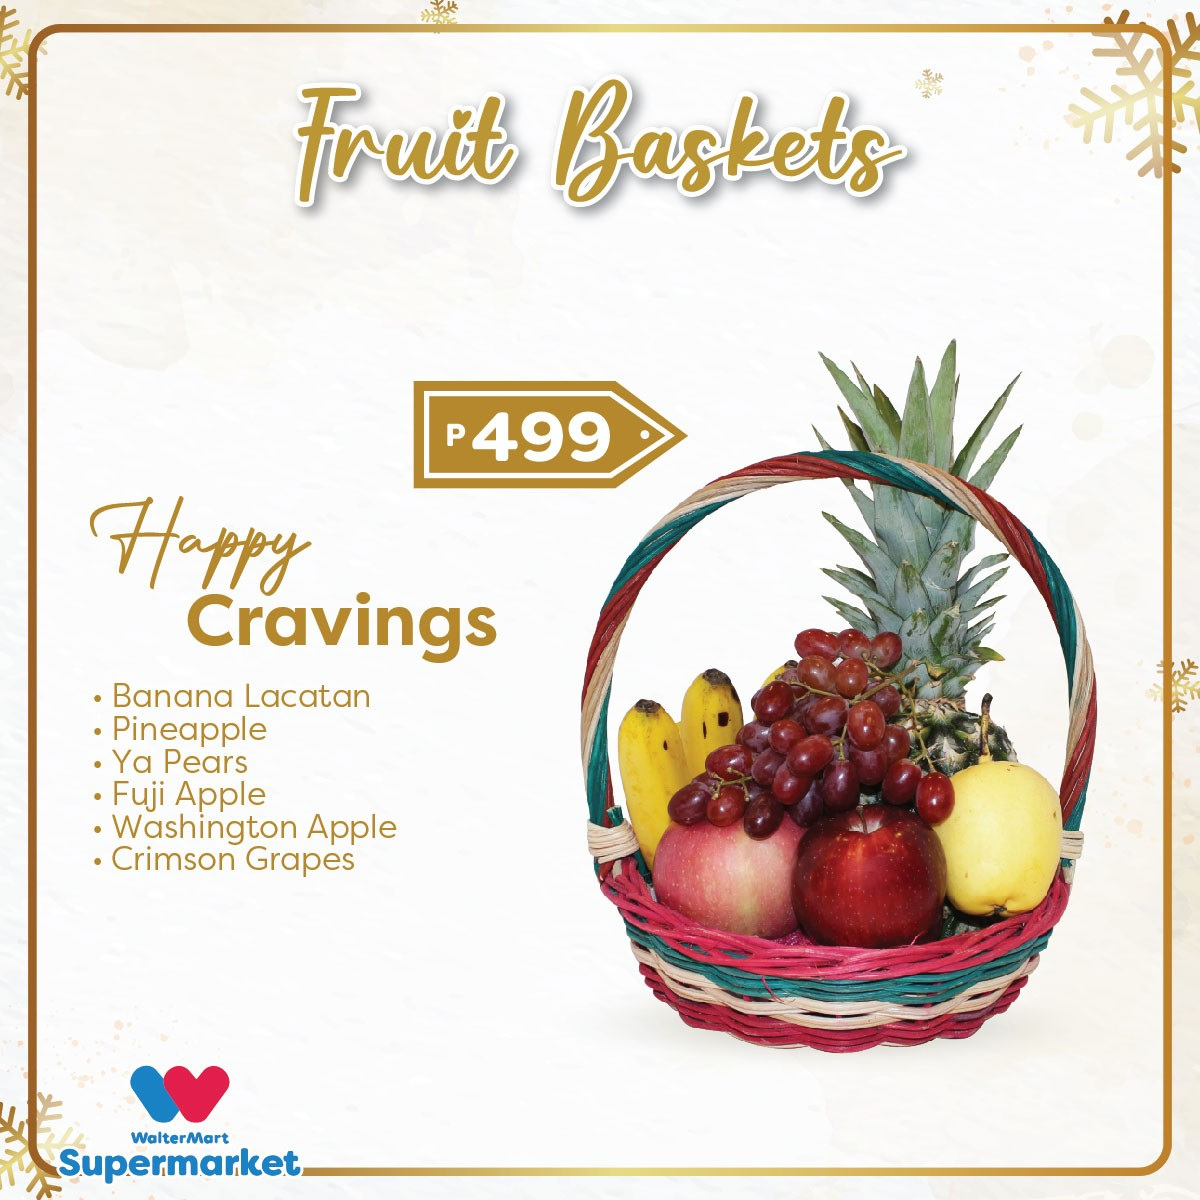 thumbnail - Walter Mart offer  - Sales products - grapes, pineapple, pears, Fuji apple. Page 4.